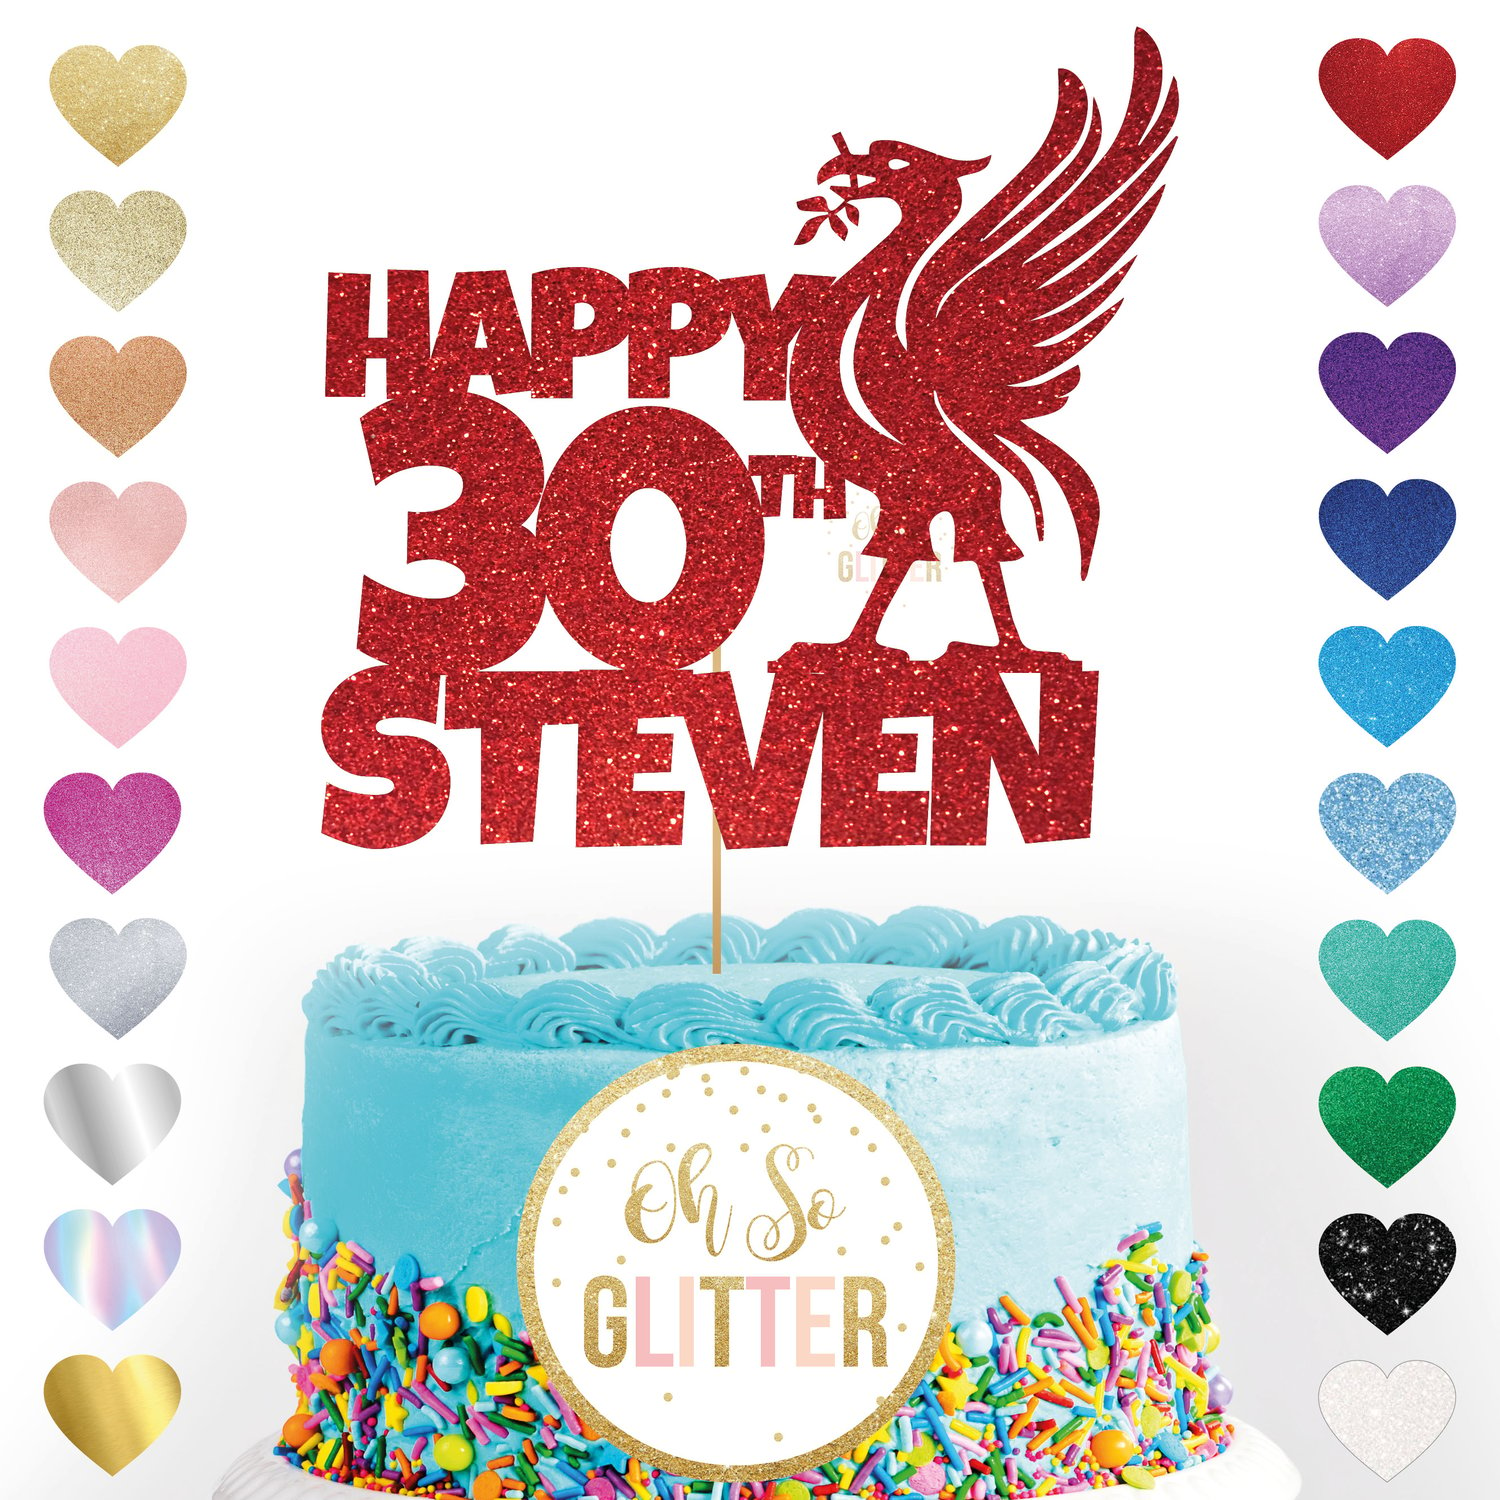 Image of Liverpool Football customised cake topper